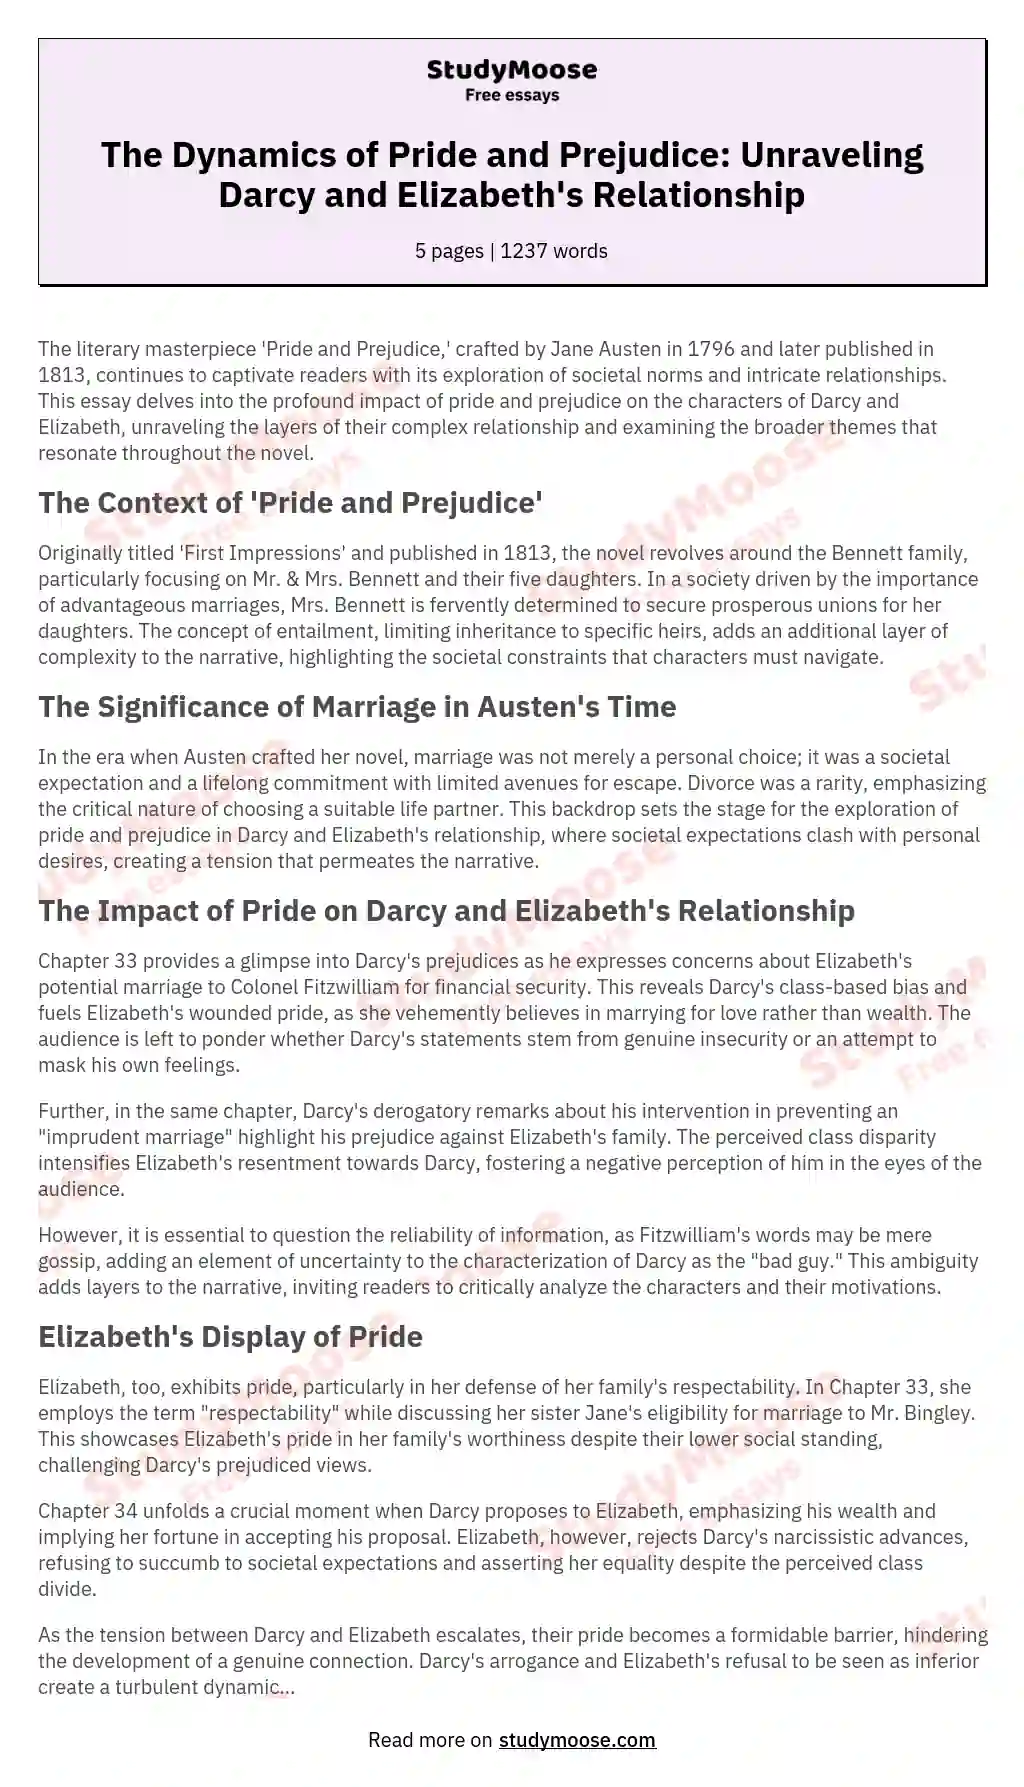 The Effect of Pride and Prejudice on Darcy and Elizabeth's Relationship